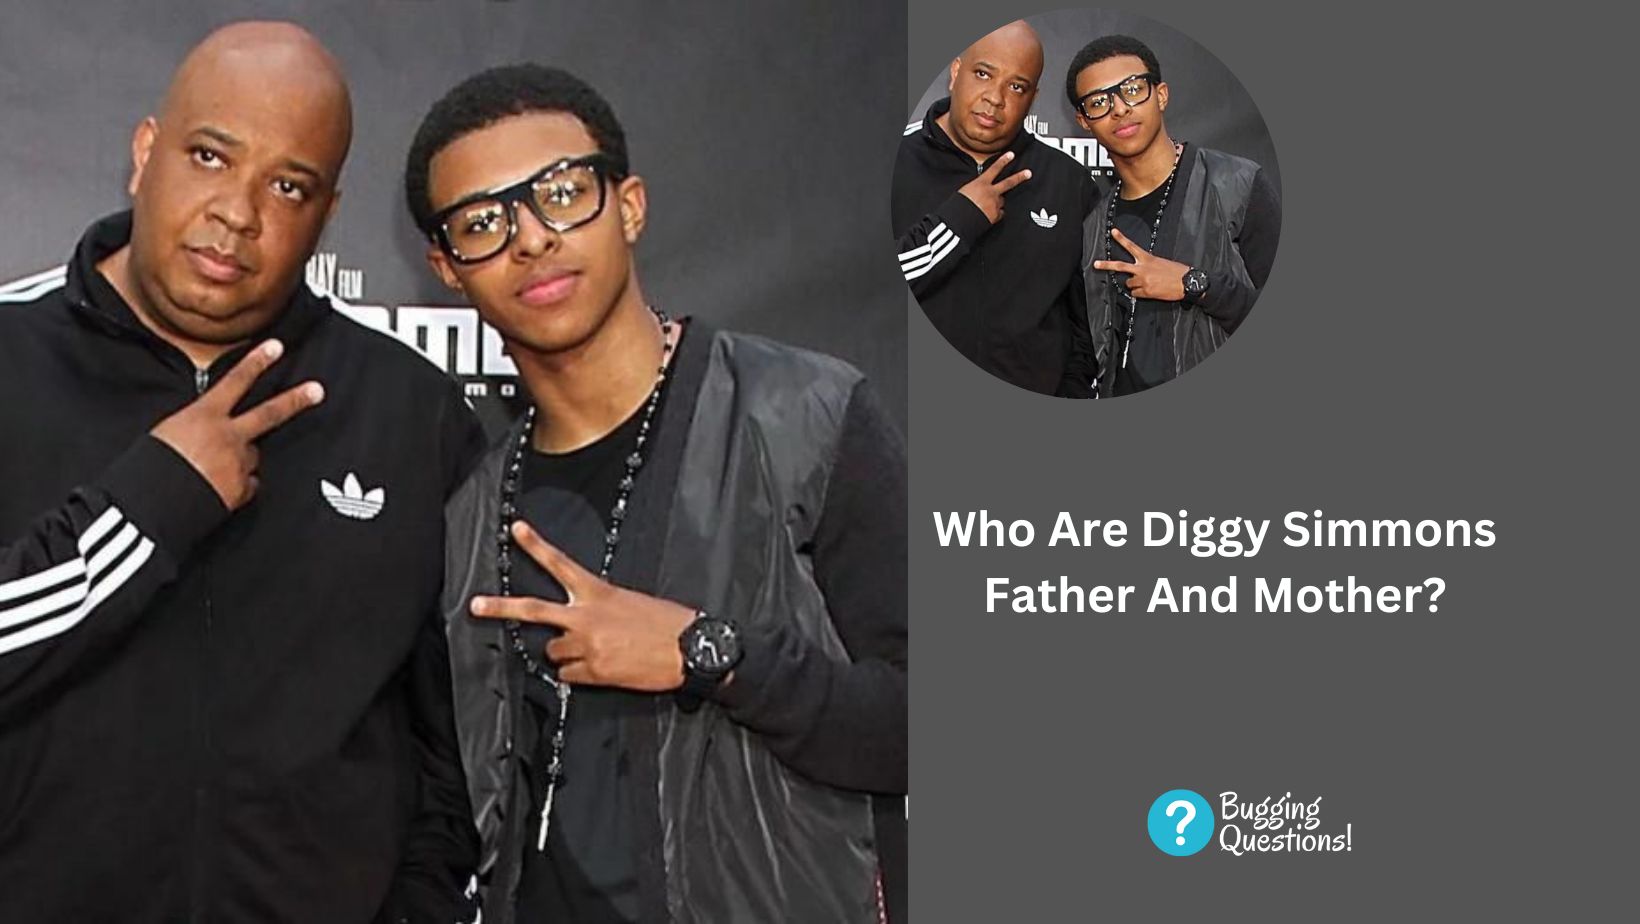 Who Are Diggy Simmons Father And Mother?